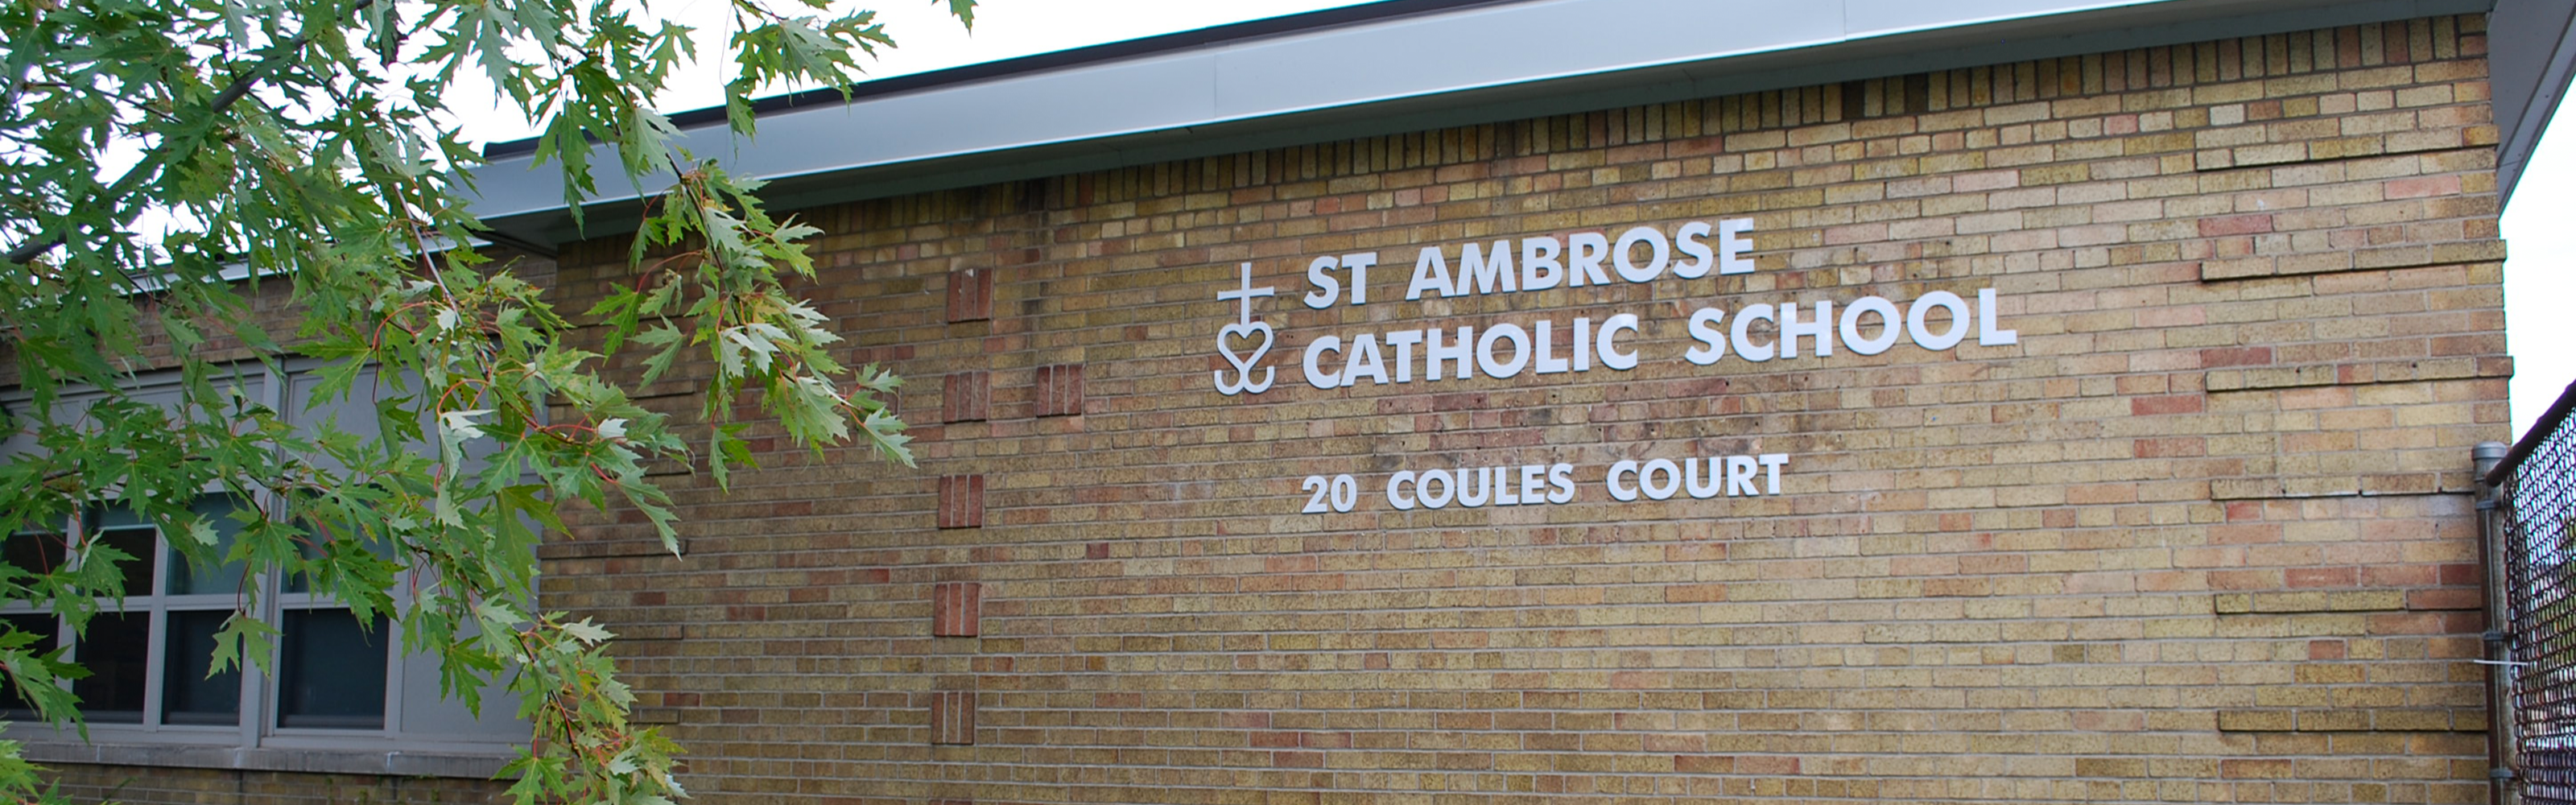 The front of the St. Ambrose Catholic School building.